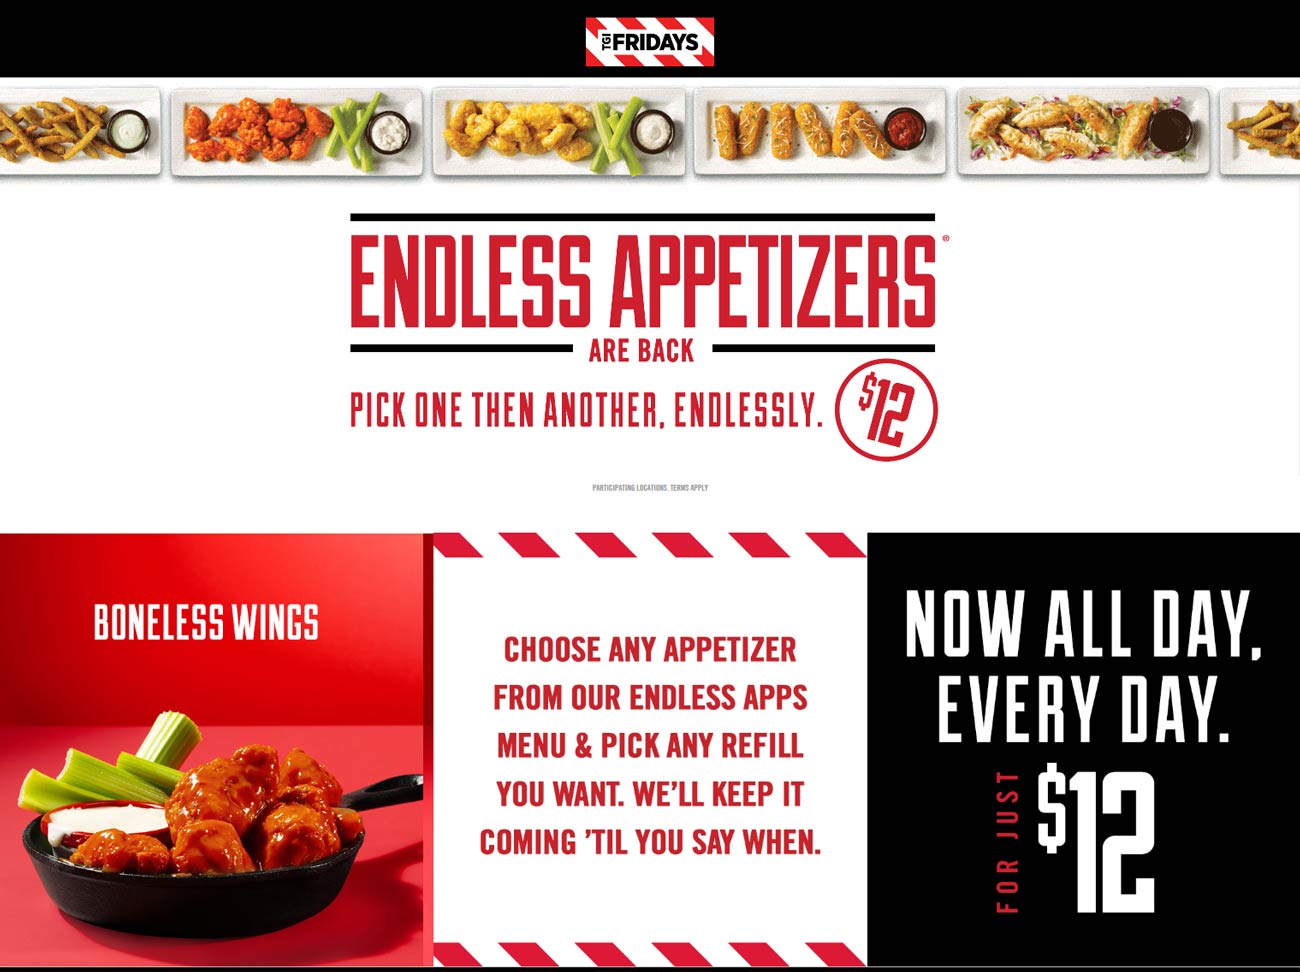 TGI Fridays coupons & promo code for [June 2022]